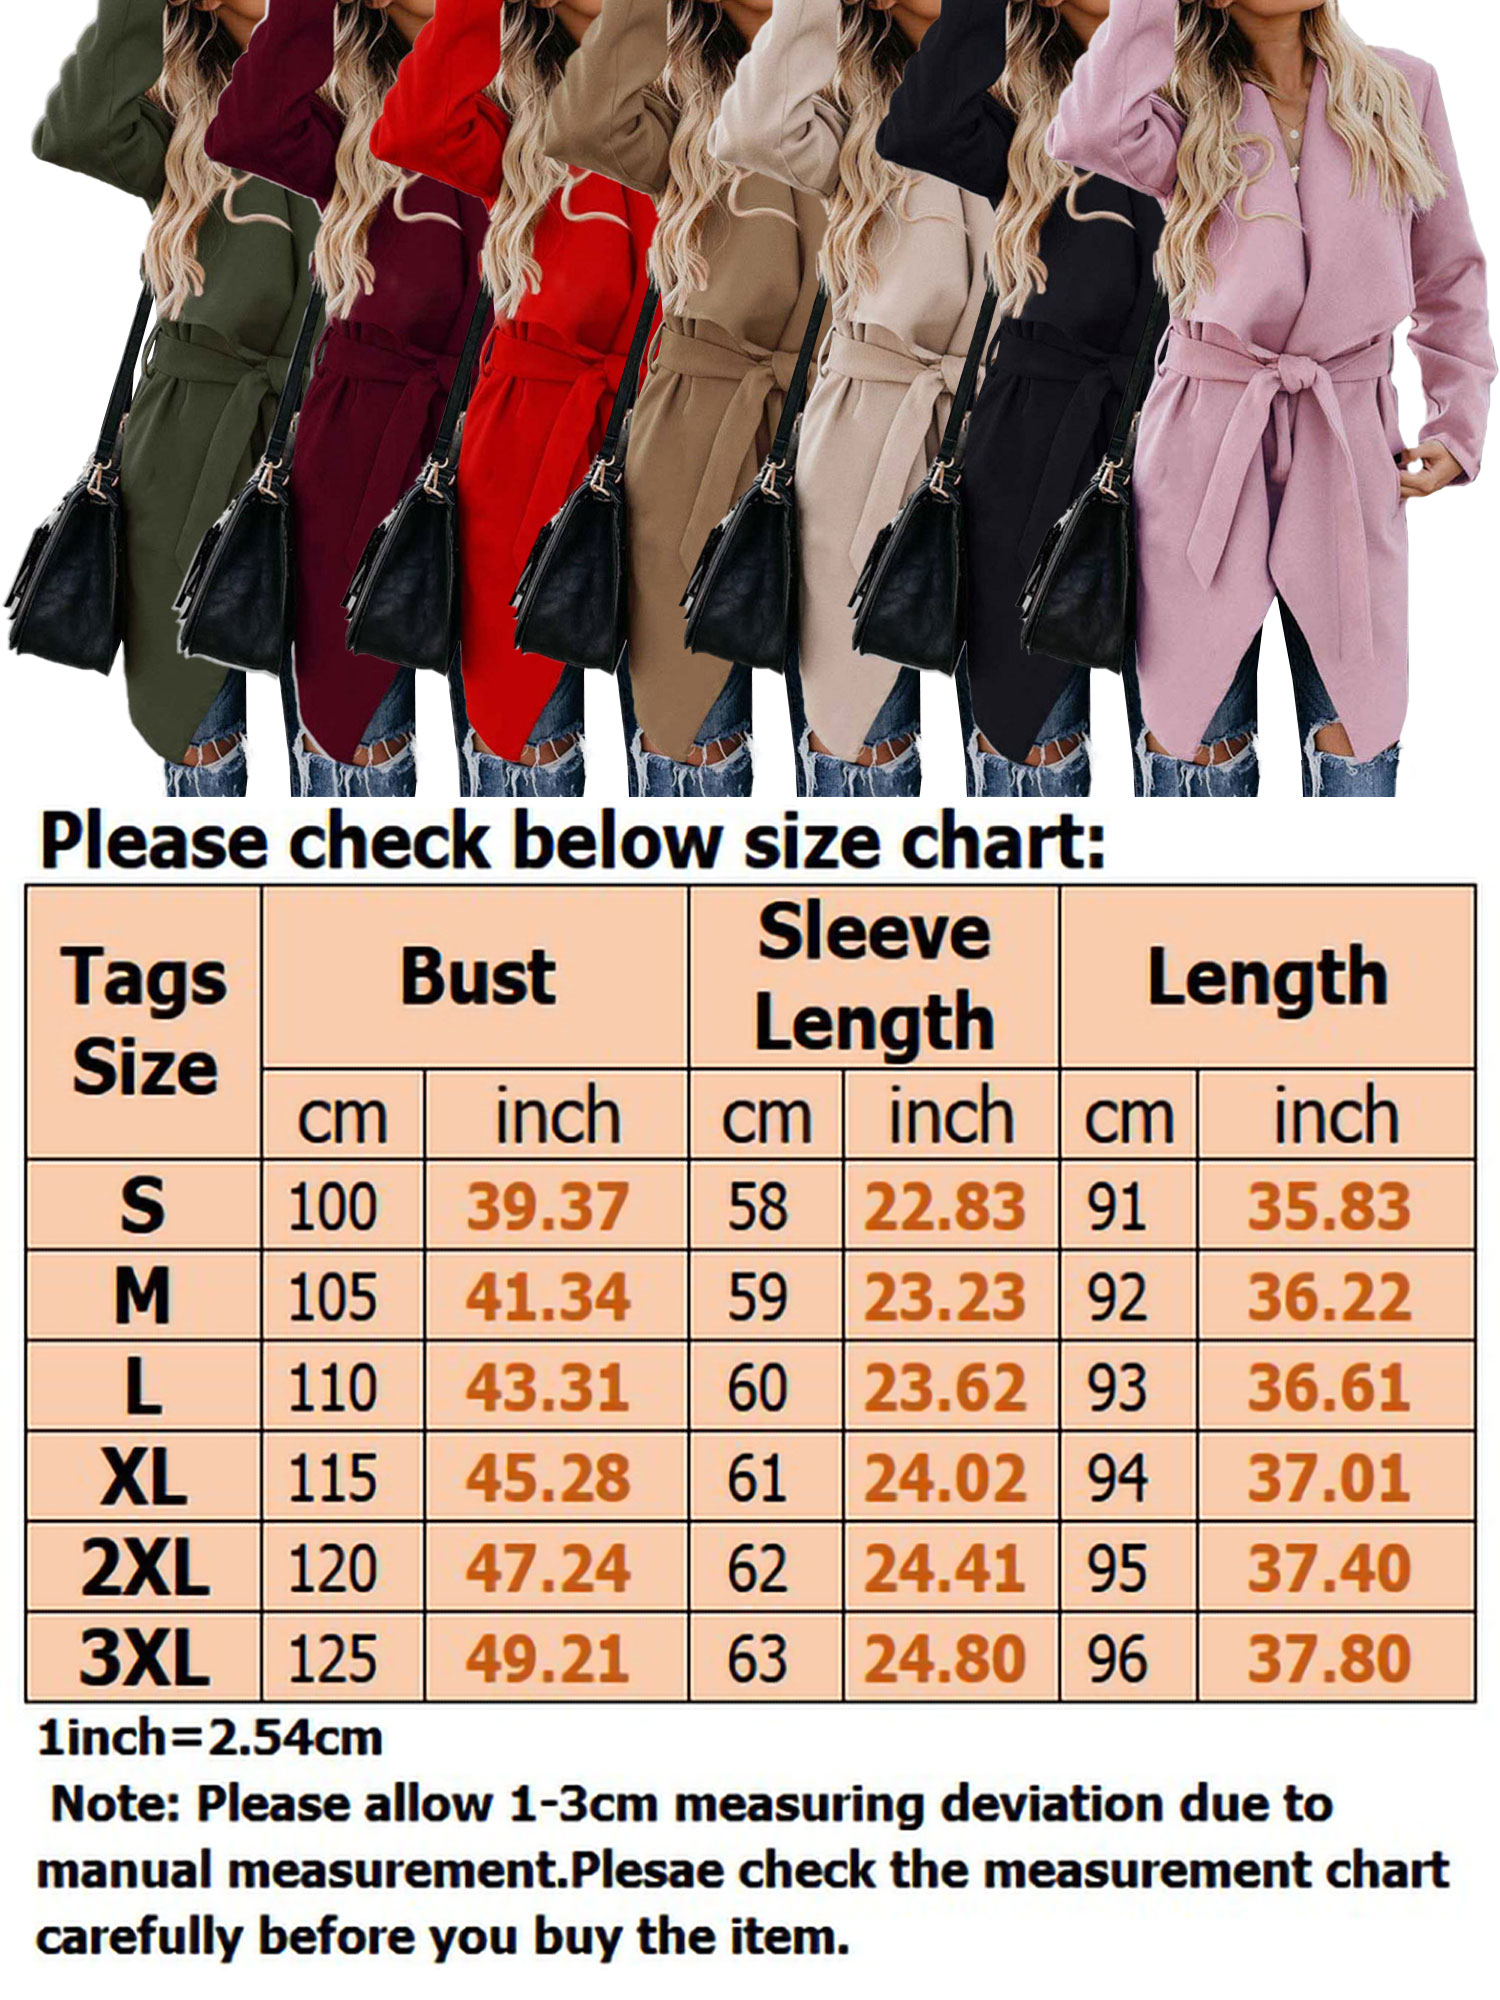 HIMONE Womens Long Wrap Coat Peacoat with Belt Trench Coat Open Front Cardigan Long Sleeve Jacket Overcoat Outerwear Classic Thin Walker Coat - image 2 of 2